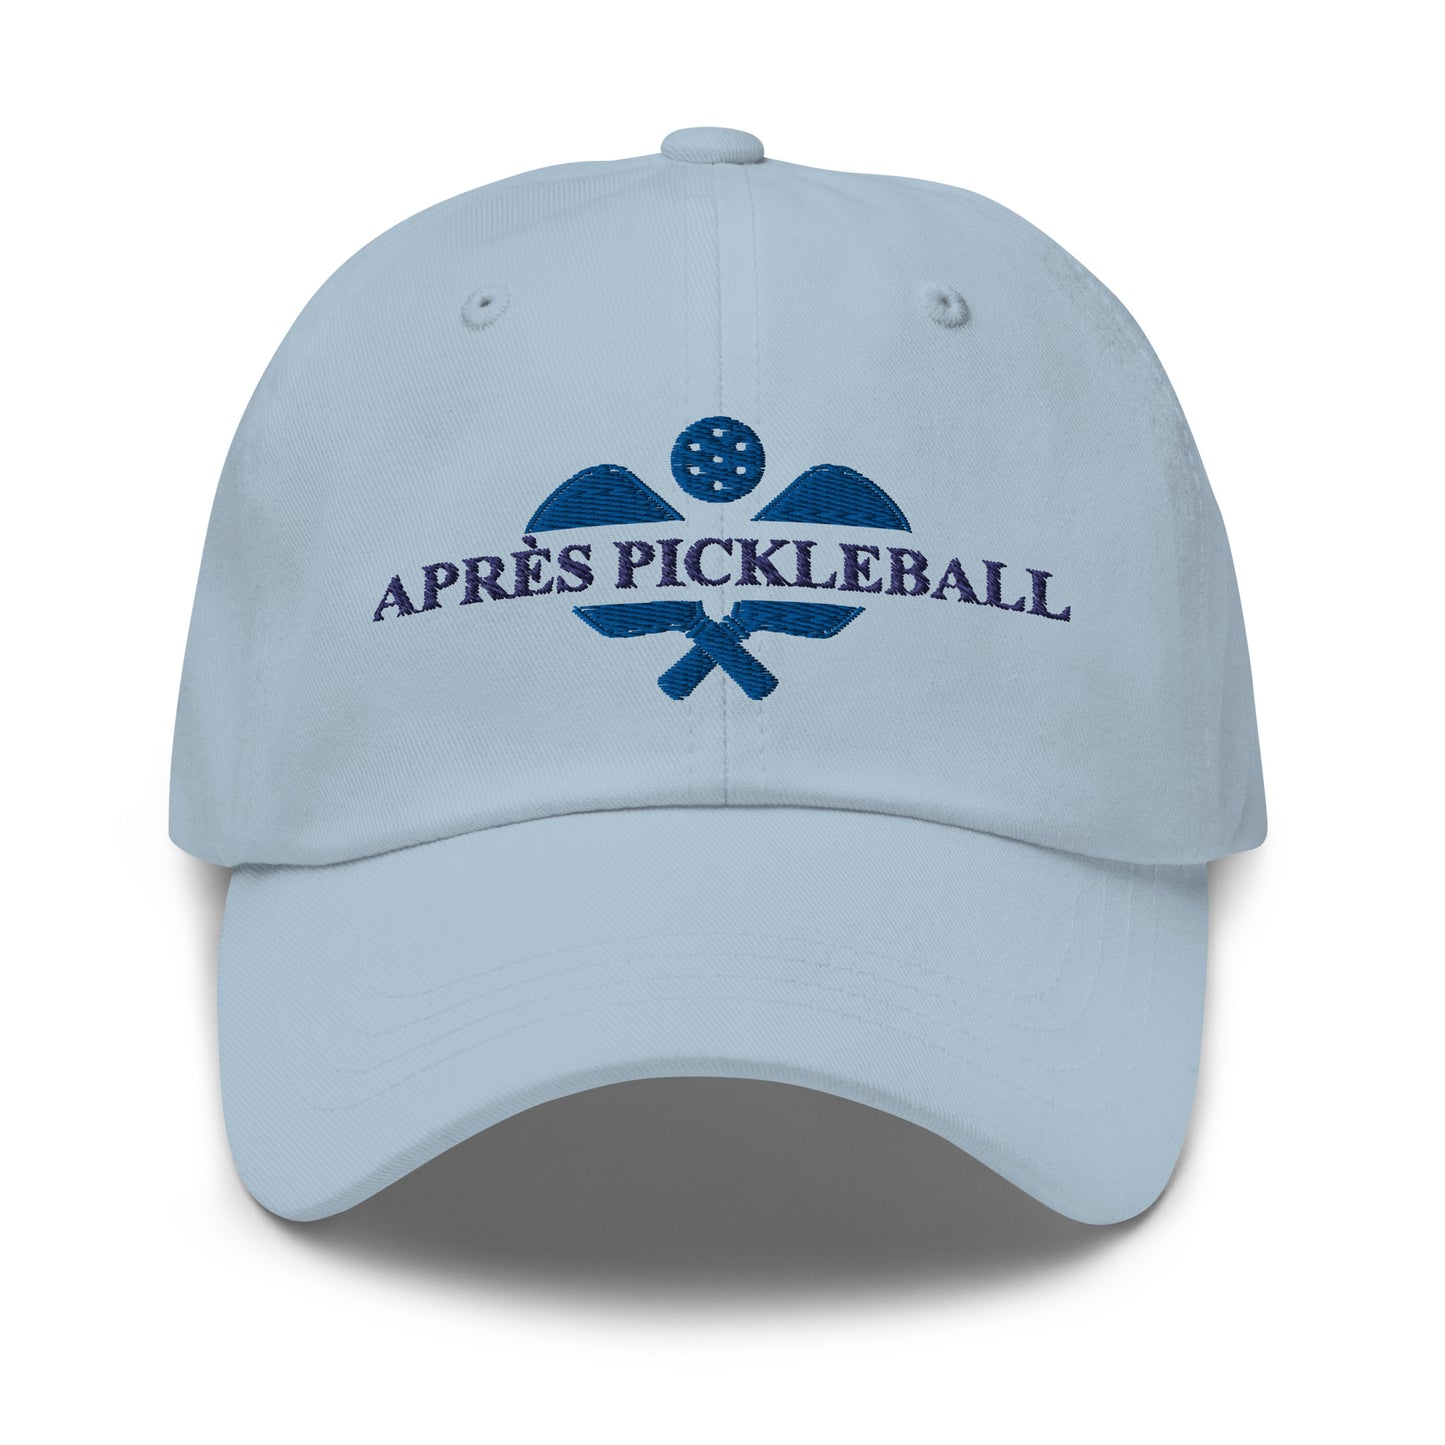 Après Pickleball Embroidered Hat